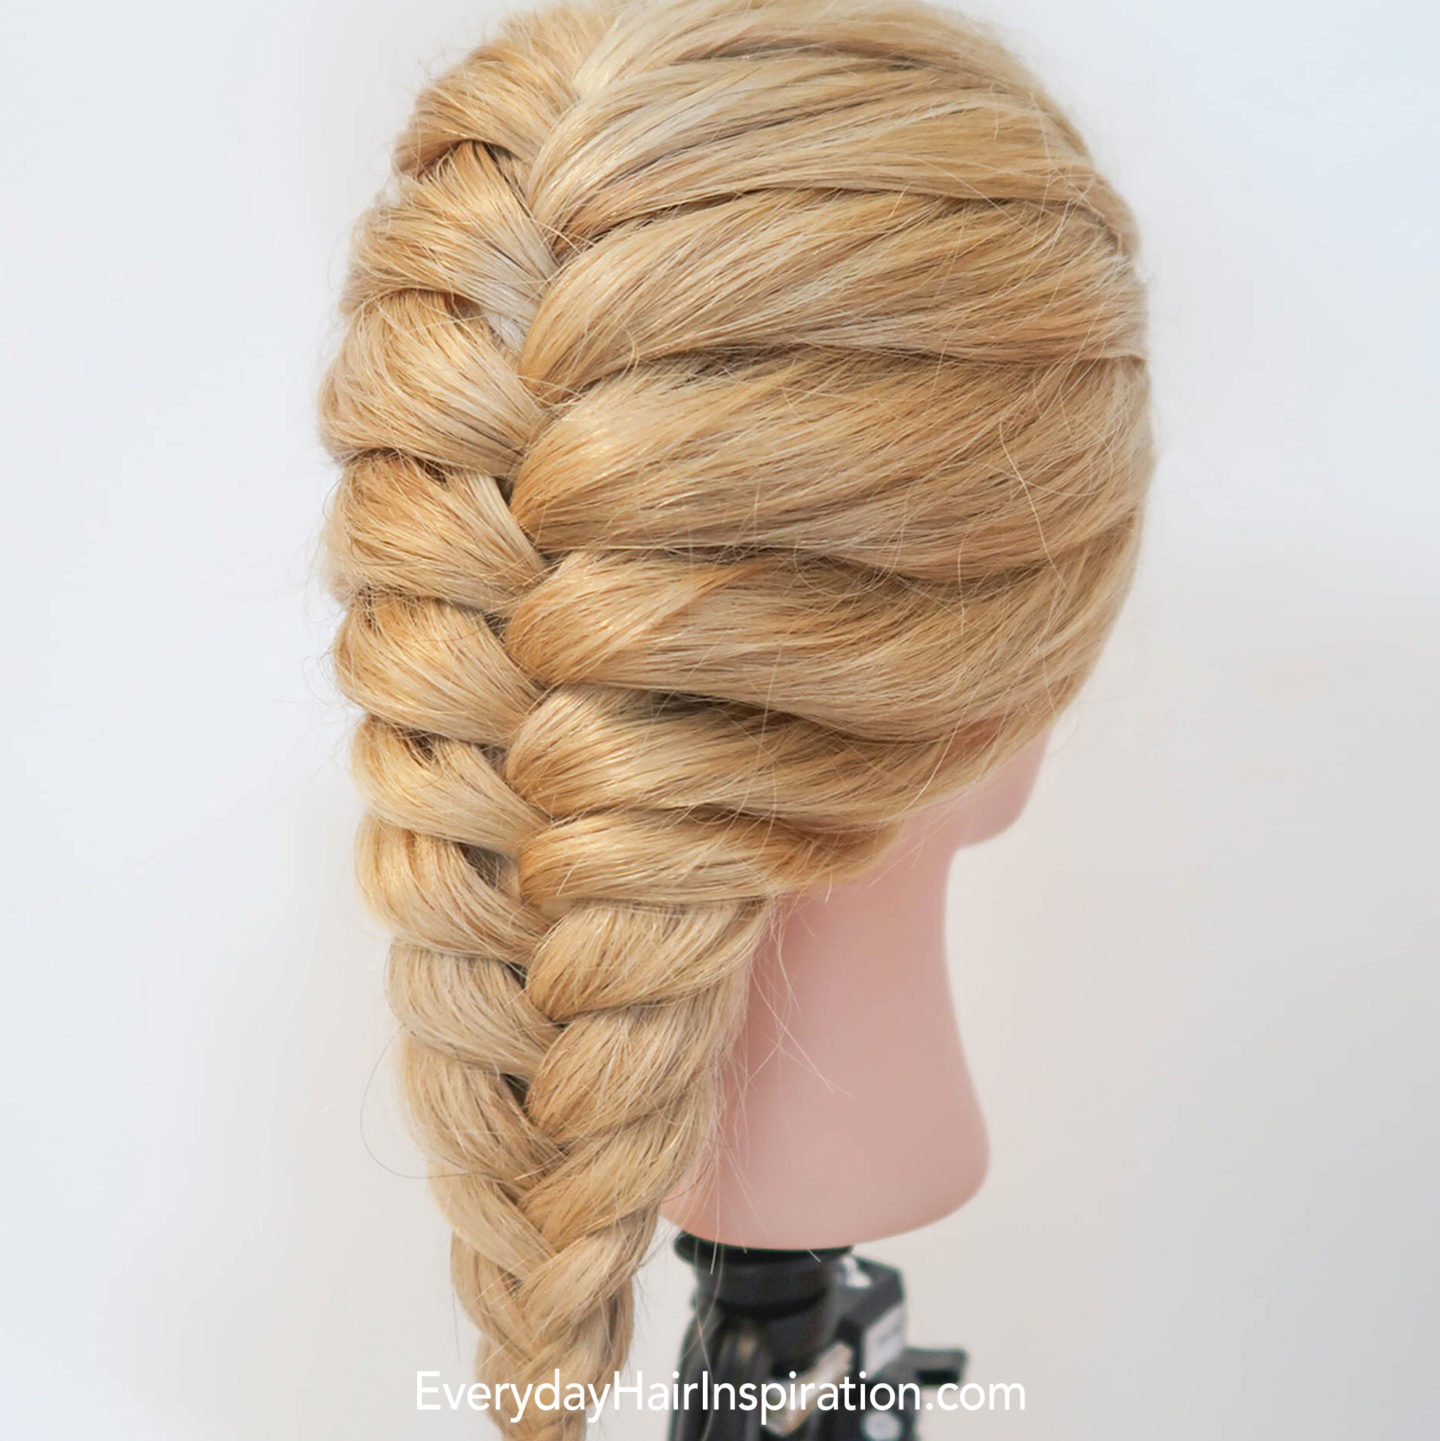 How To Faux French Braid - Everyday Hair inspiration